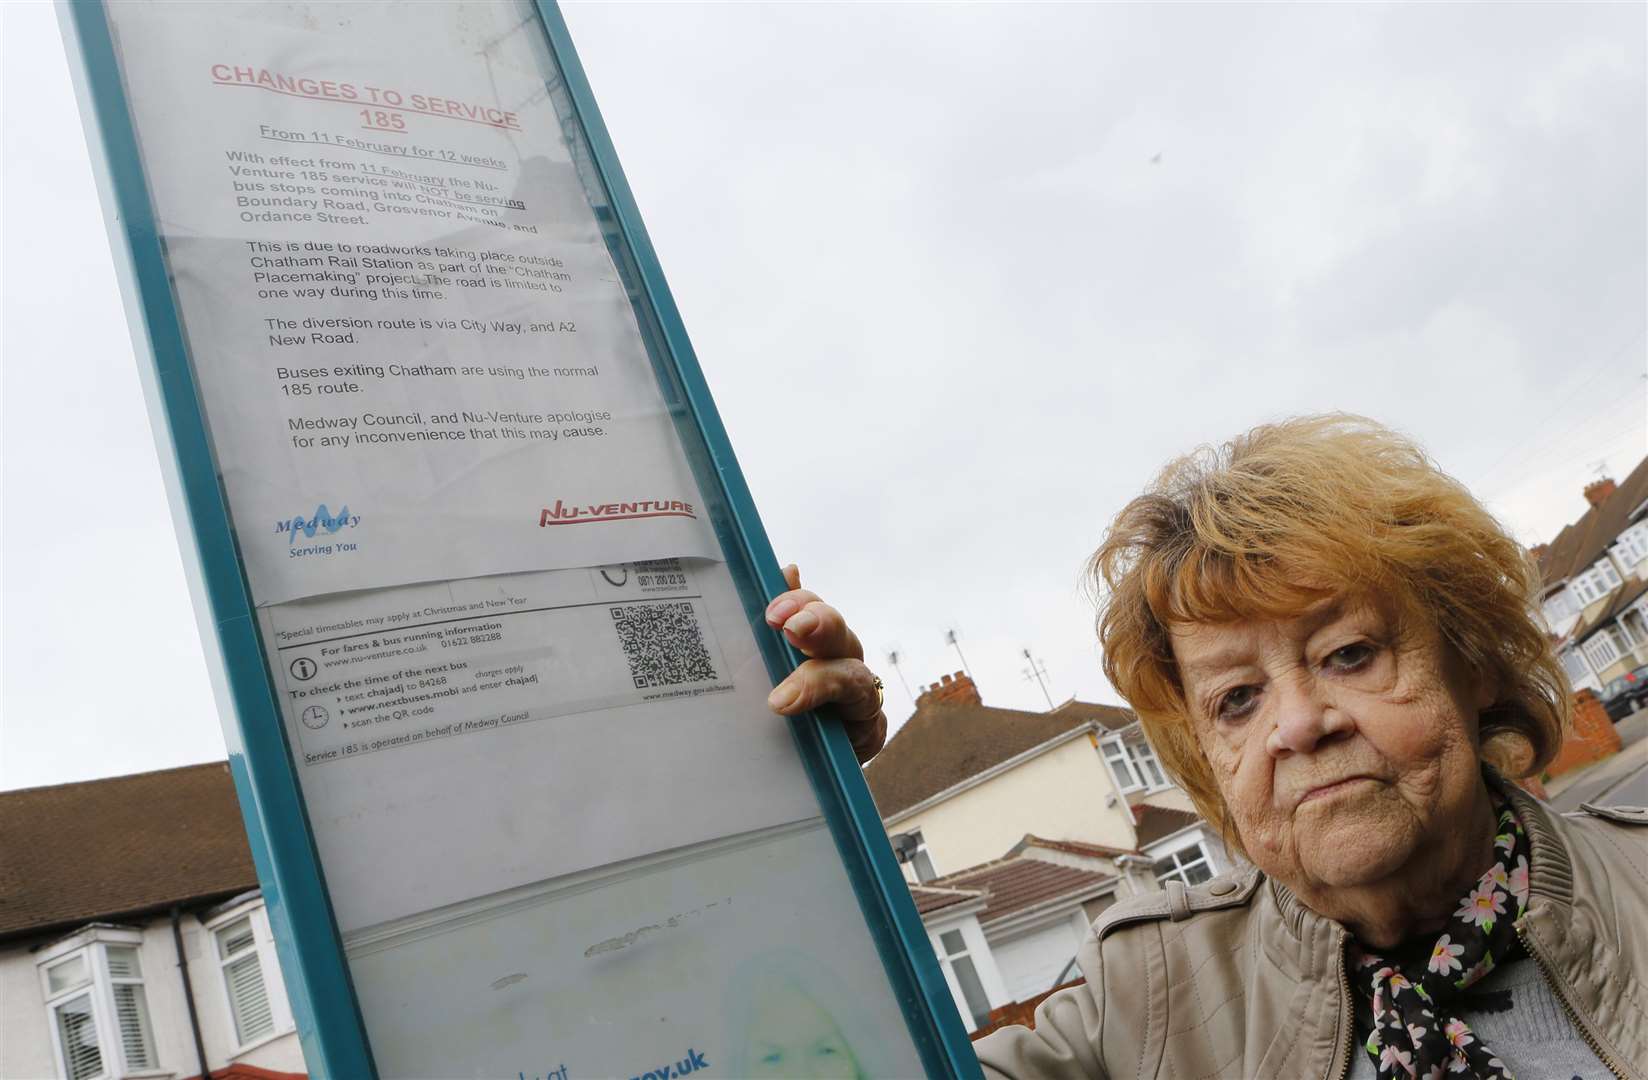 Beryl Smith 77, has been without a bus service for three months and having to fork on taxi fares